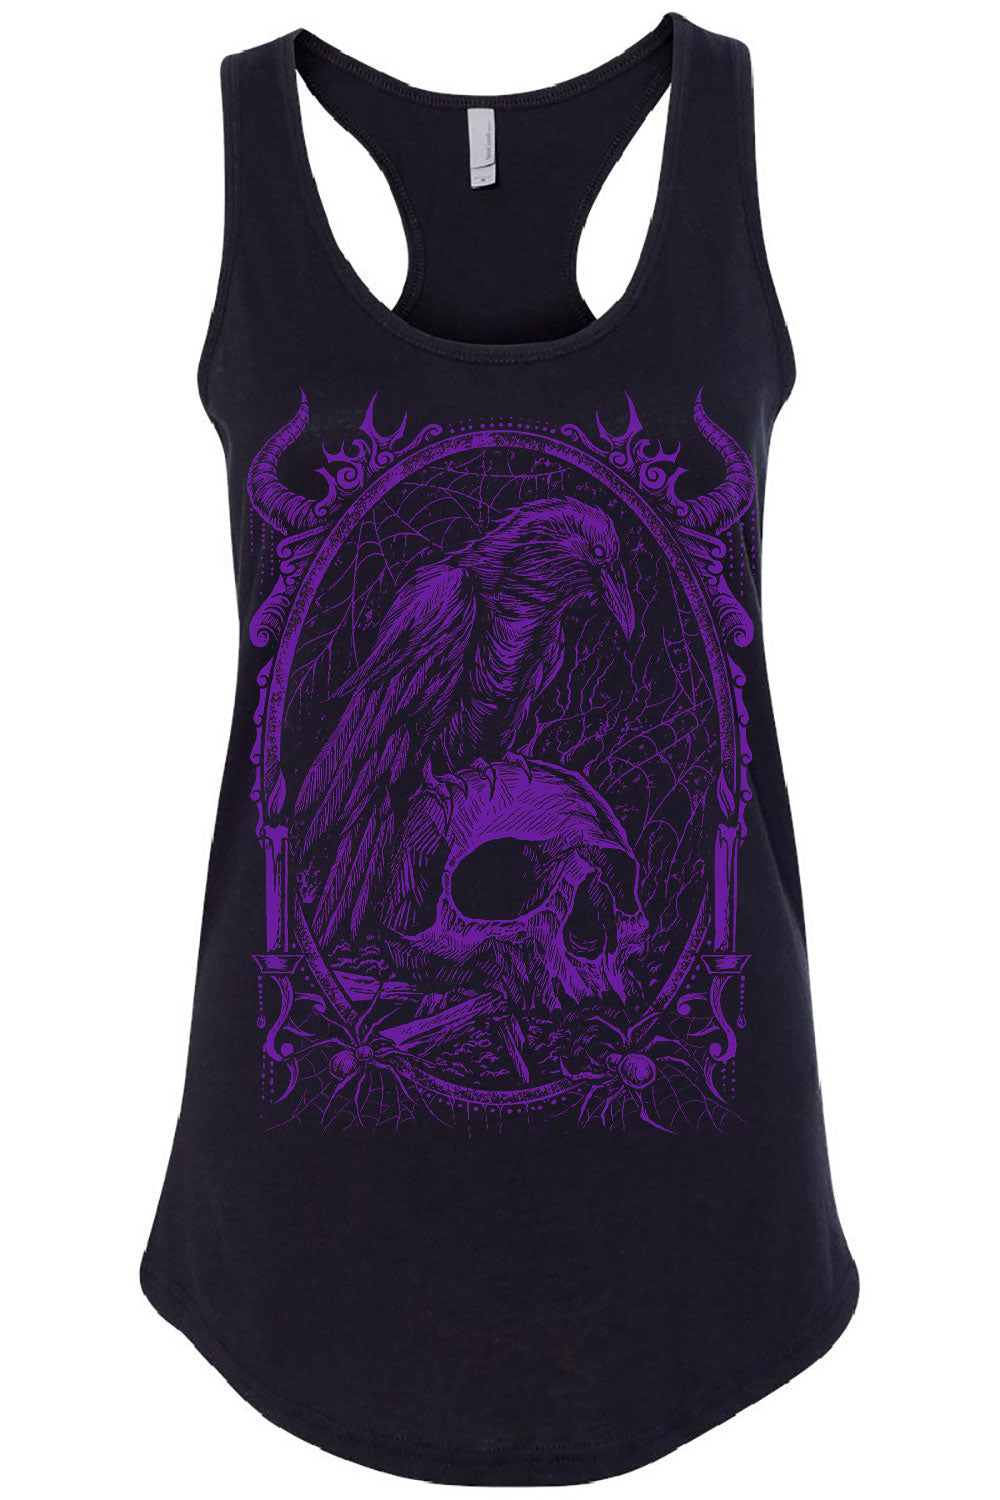 gothic womens tank top